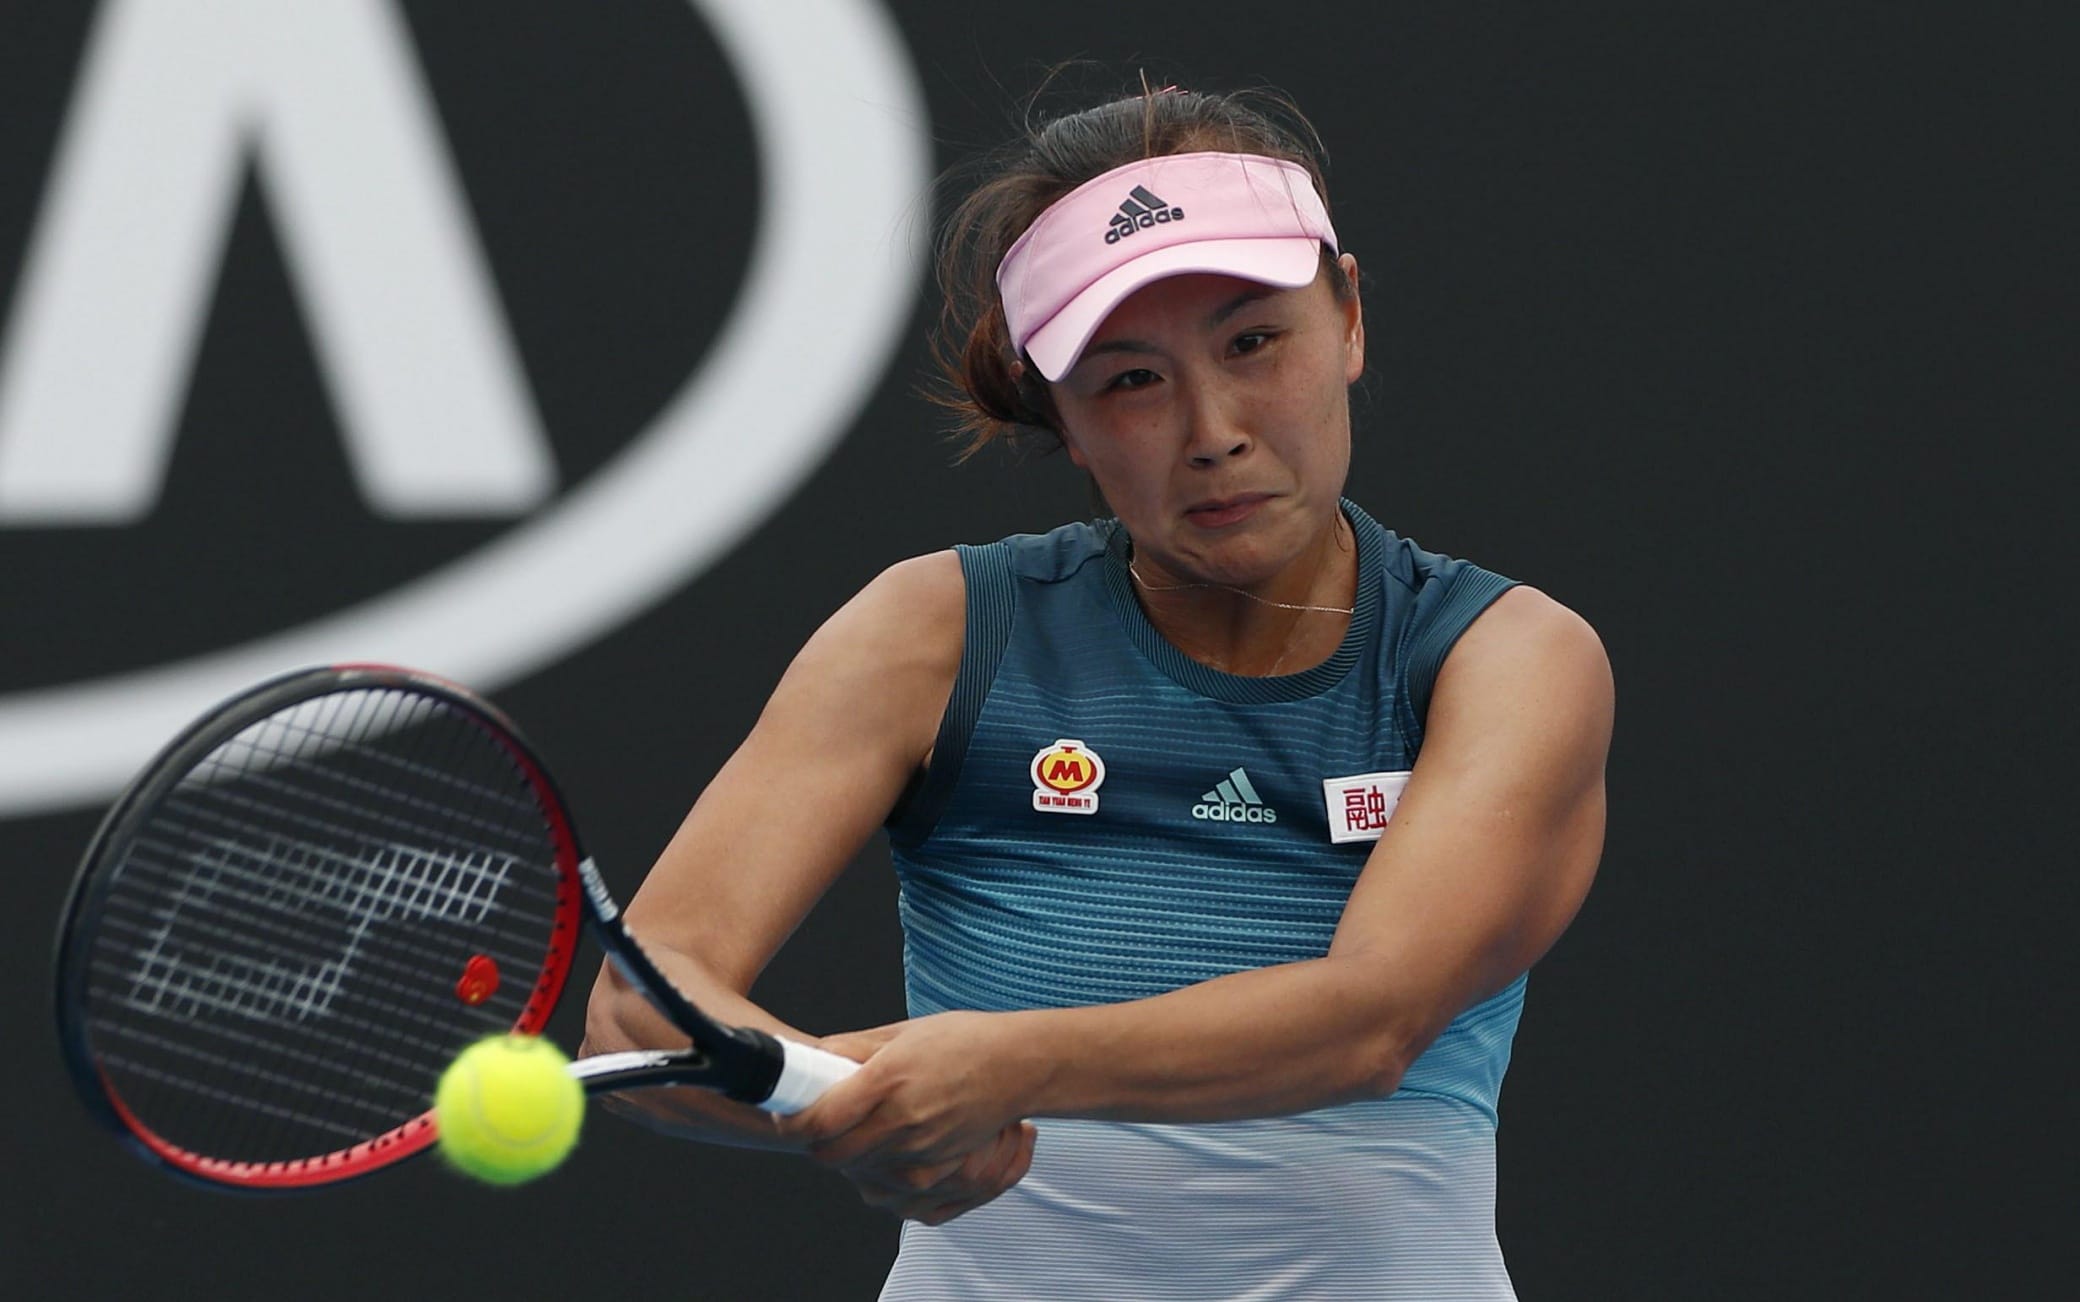 Tennis player Peng Shuai disappeared, WTA threatens to cancel tournaments in China: “We need clarity”